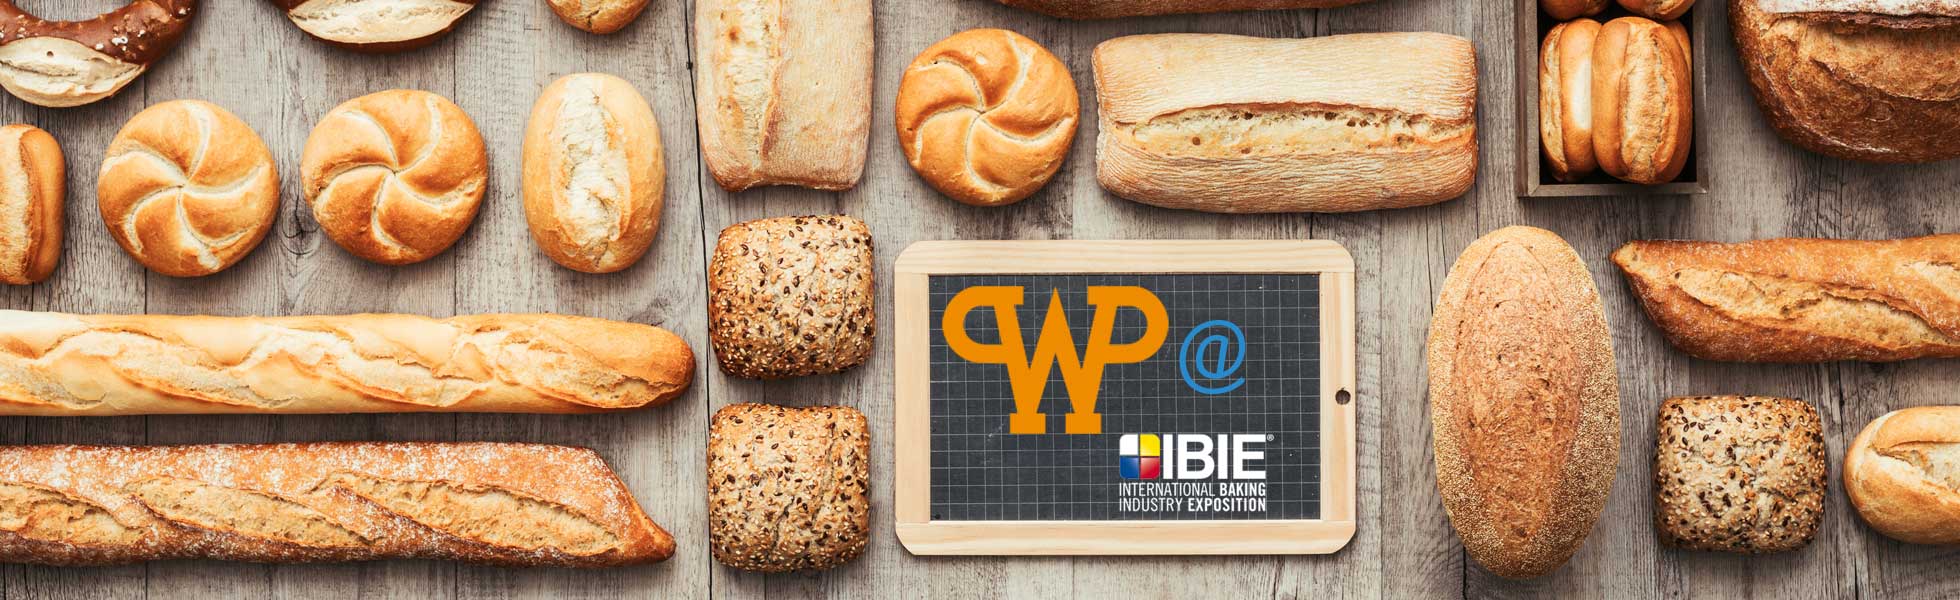 Bakers! Join us in September in Las Vegas at IBIE 2022 for an immersive WP experience!